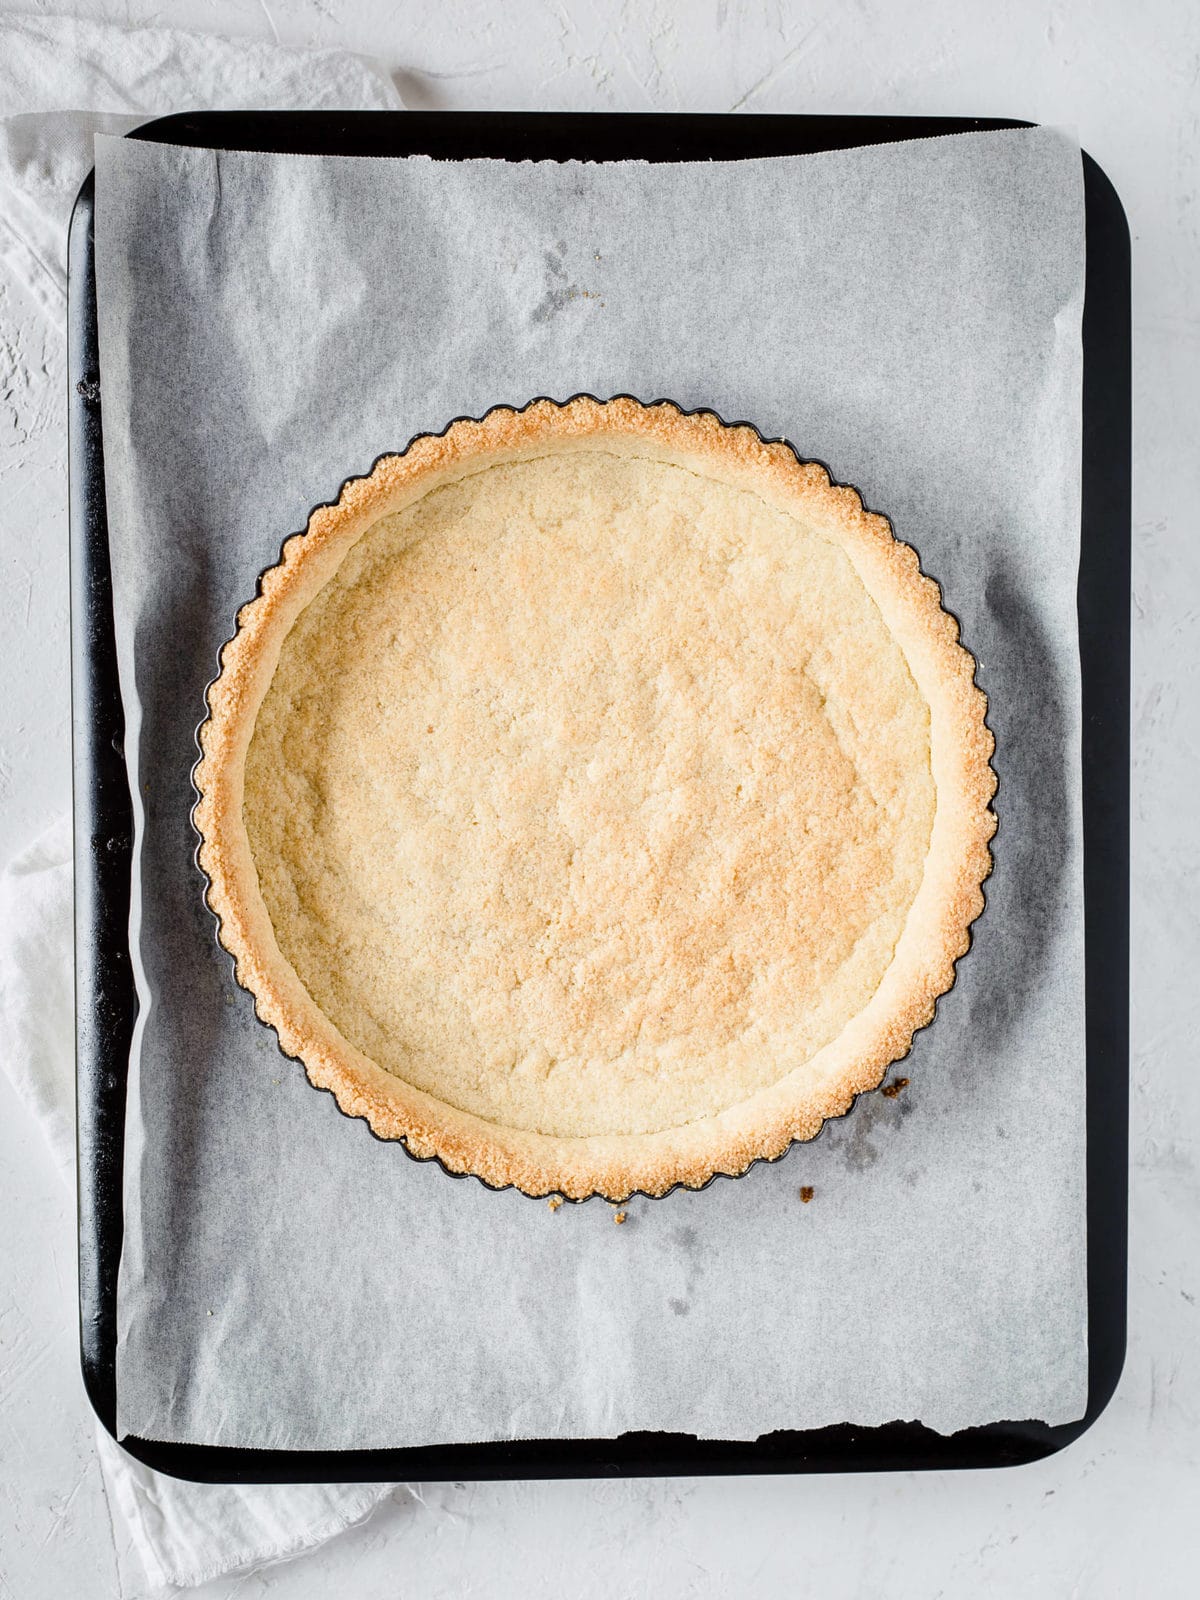 a gluten free pie crust in a pie tin, freshly baked and out of the oven.